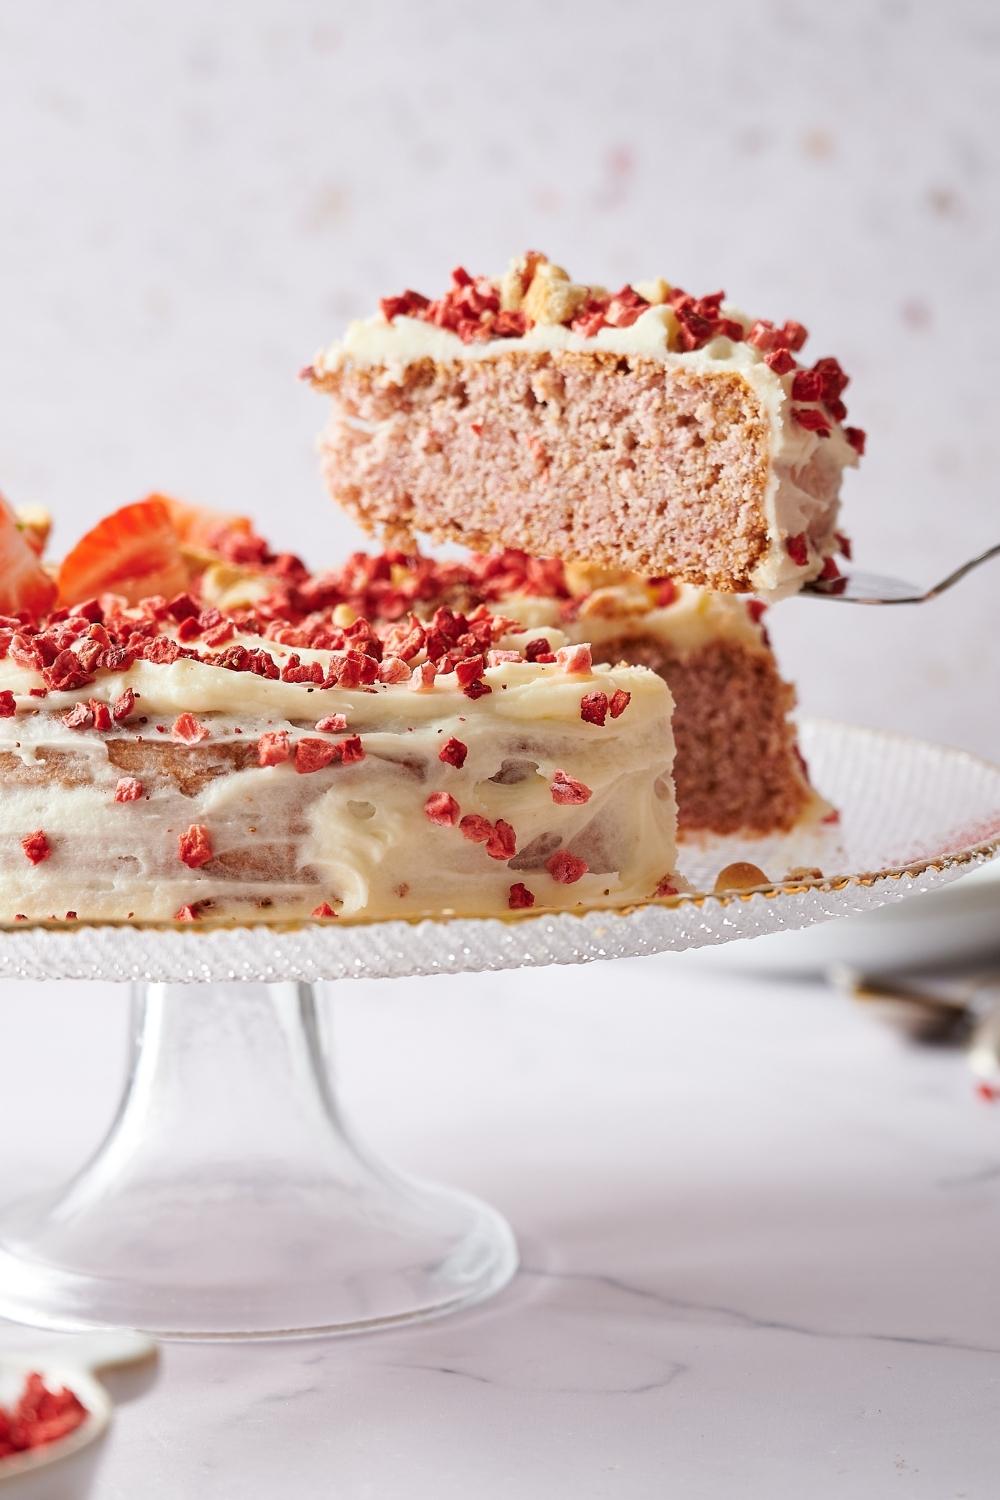 On a cake stand sits a whole strawberry cake on a serving plate. It's topped with dried strawberries, crumbled cookies, frosting and fresh sliced strawberries. A slice has just been cut and a spatula has lifted it above the cake.